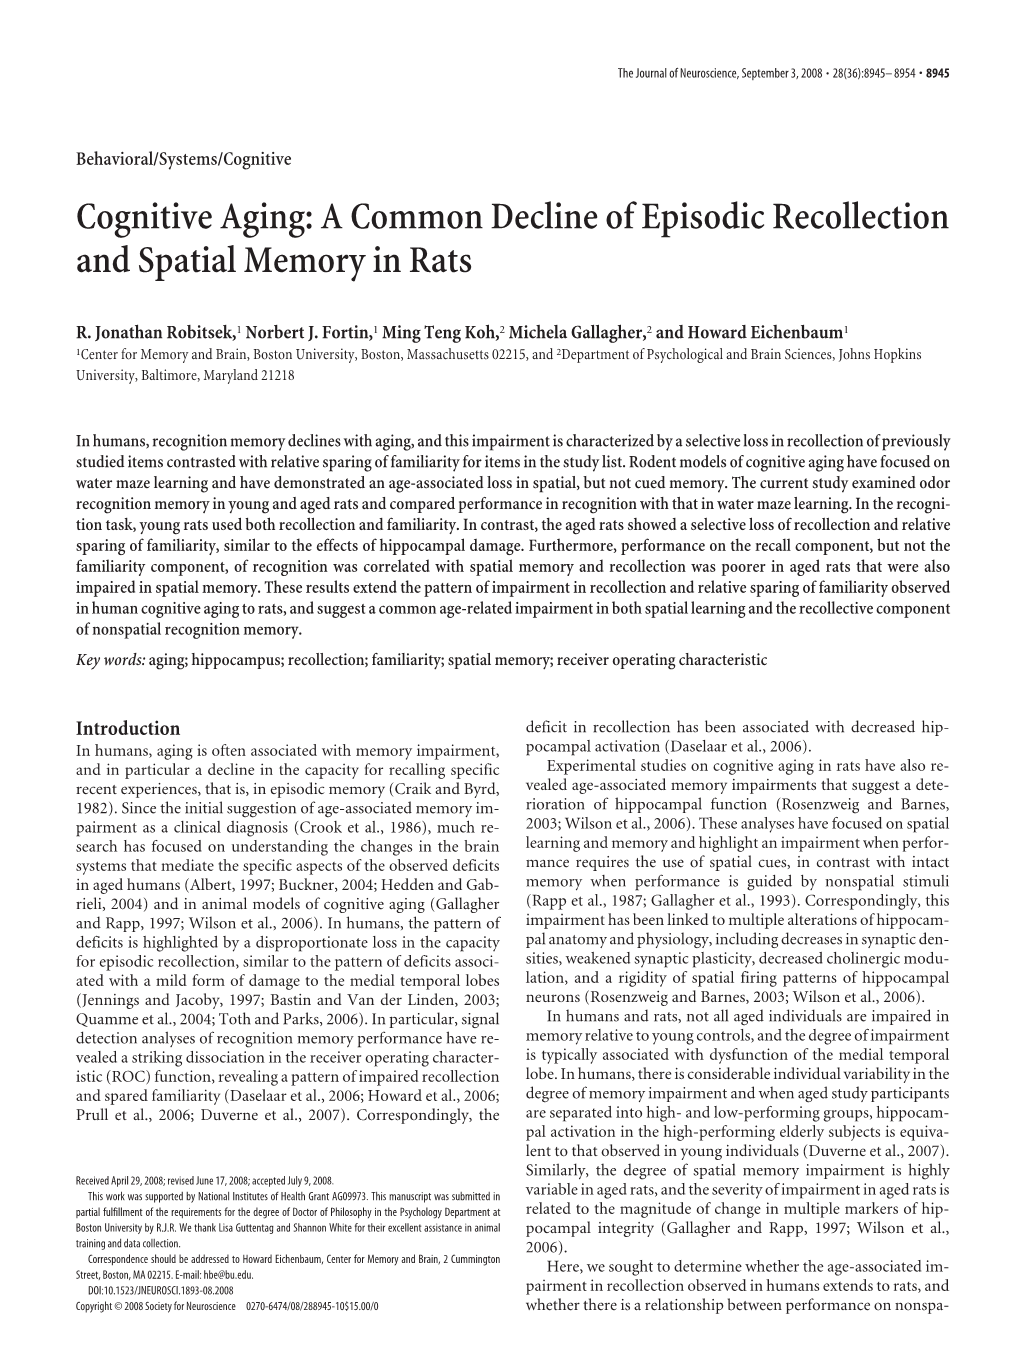 Cognitive Aging: a Common Decline of Episodic Recollection and Spatial Memory in Rats